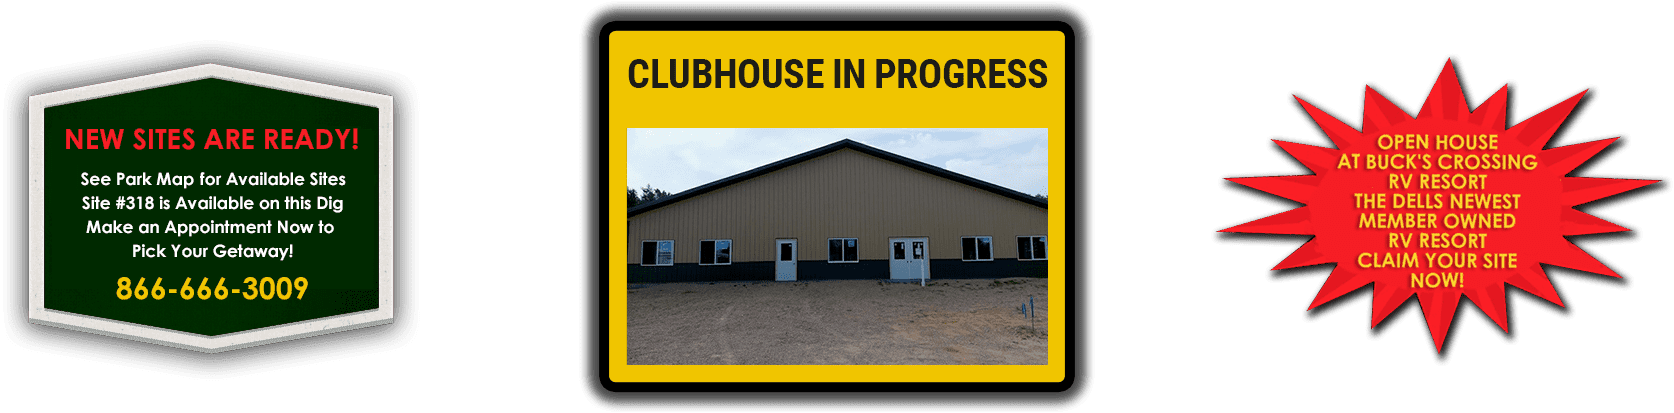 New sites are ready! | Club House In Progress